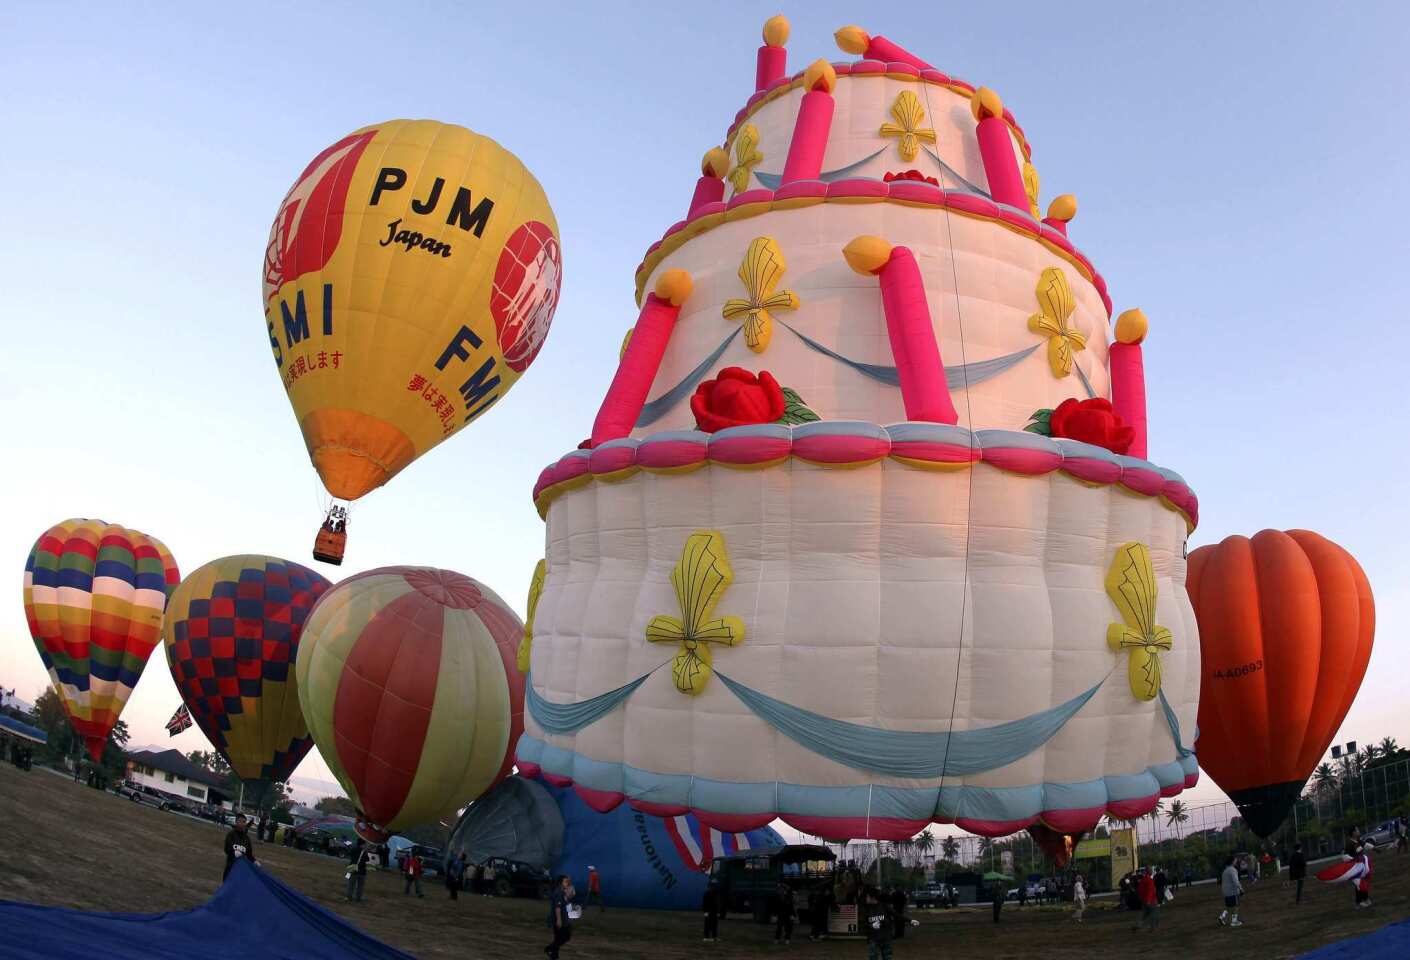 "Cake." This year's Chiang Mai International Balloon Fiesta, held in January, featured more than 20 balloons from countries all over the world, including Belgium, Japan, Malaysia, The Netherlands, Switzerland, United States of America and Vietnam. More info: chiangmaiballoon.com